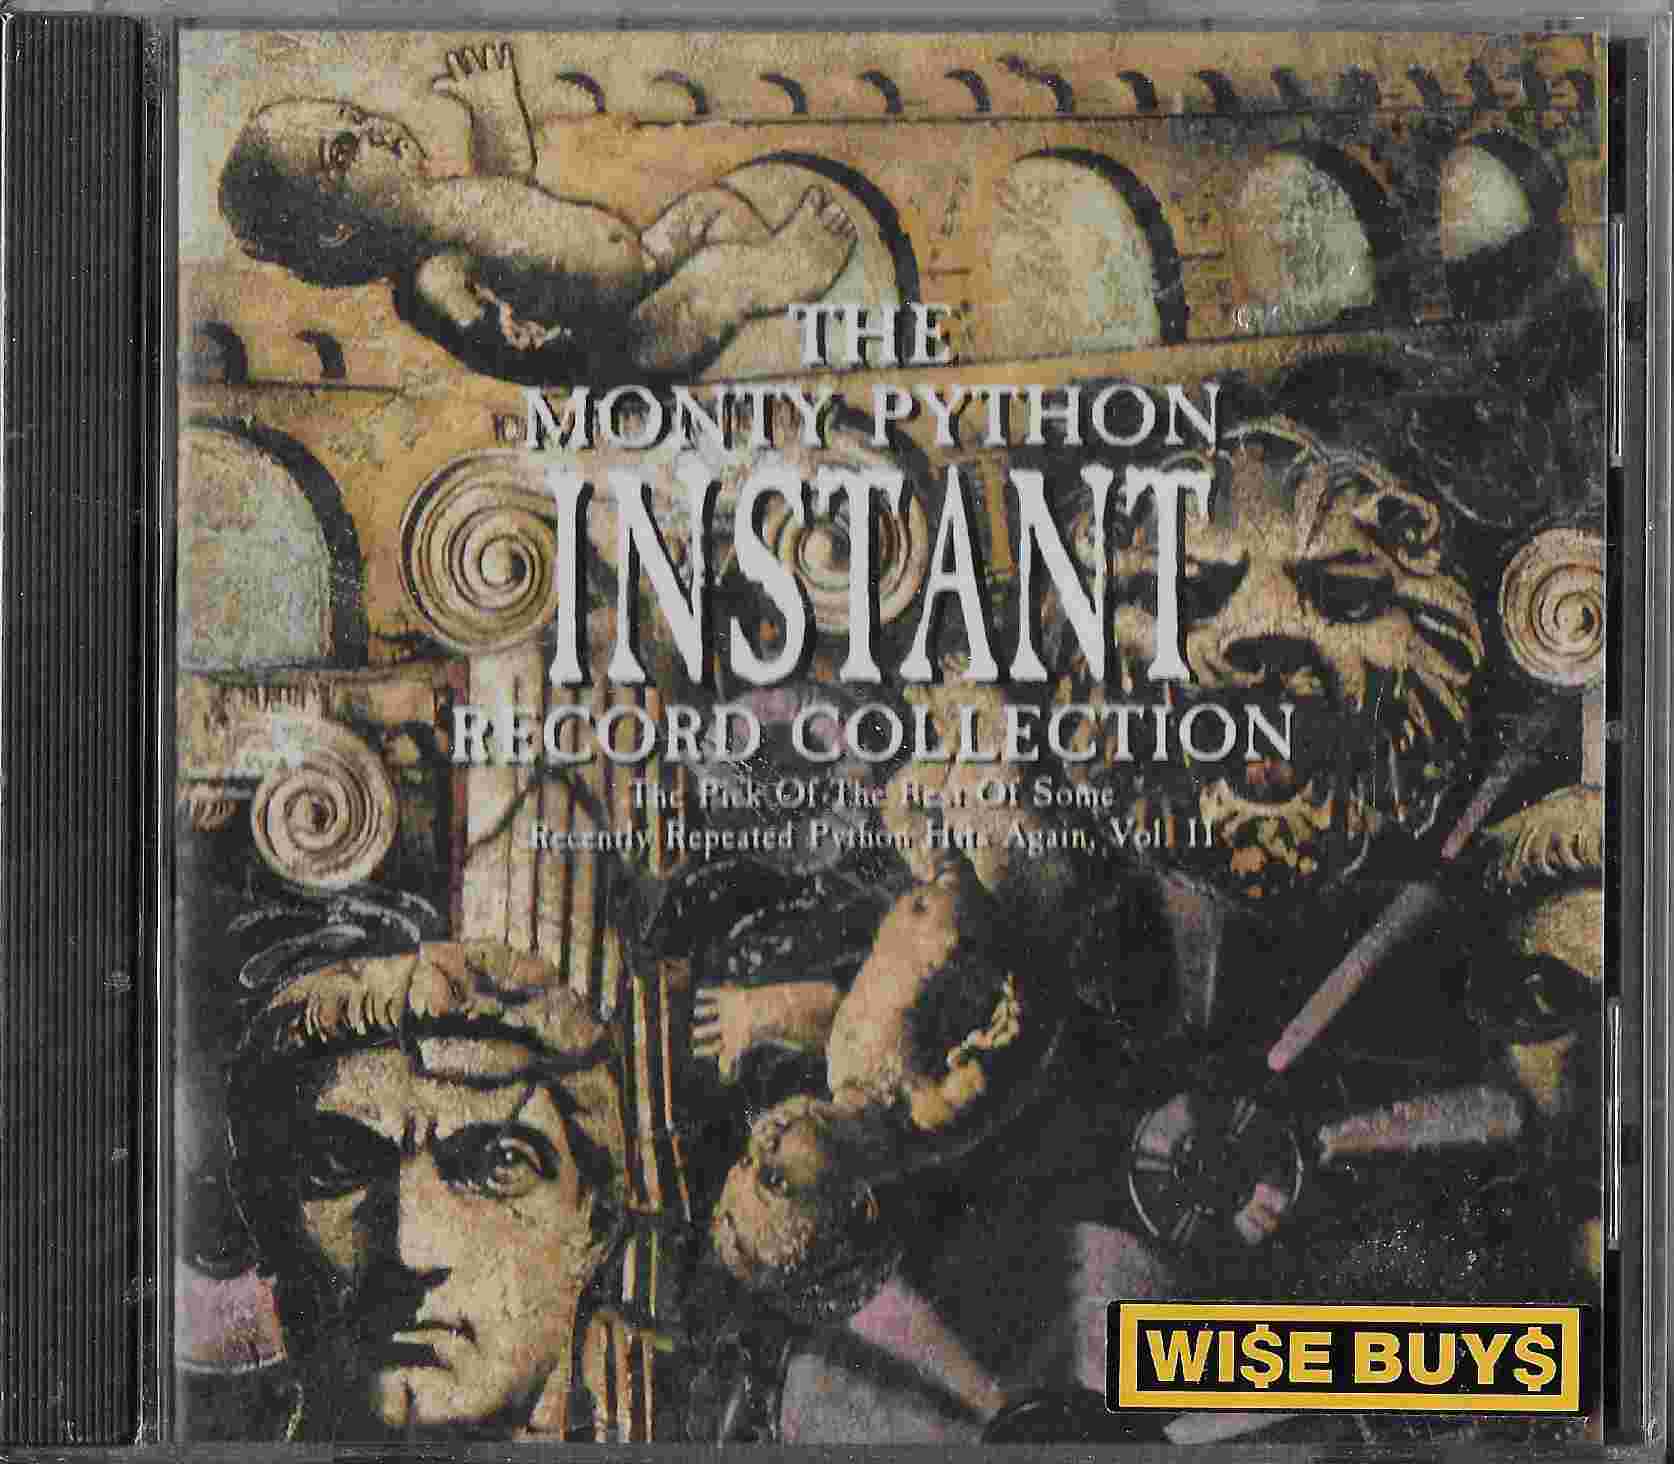 Picture of The Monty Python instant record collection - Volume II by artist Monty Python from the BBC cds - Records and Tapes library